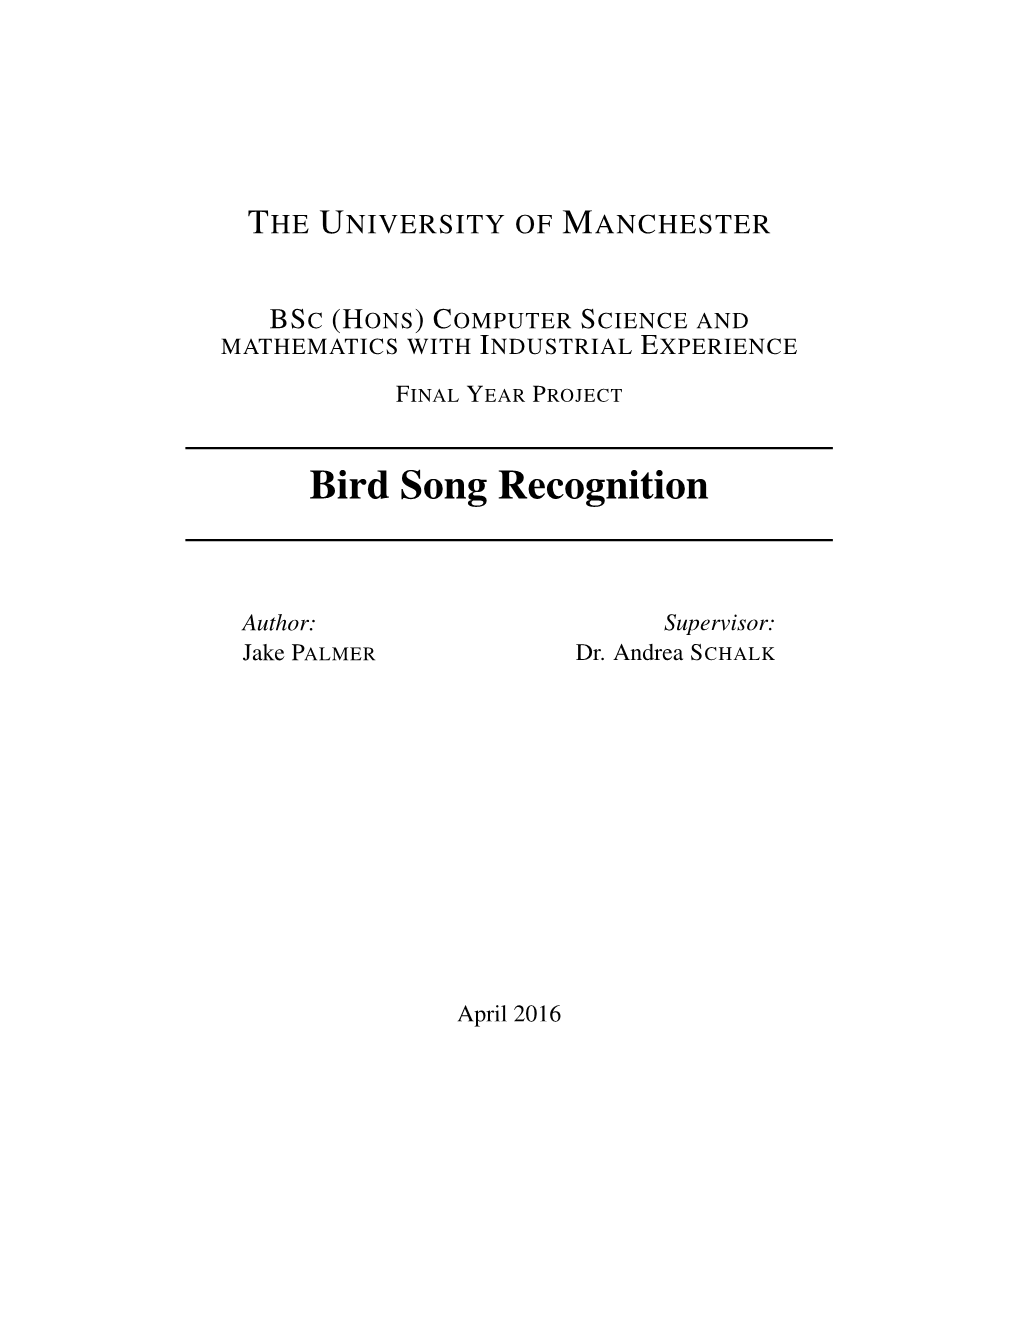 Bird Song Recognition